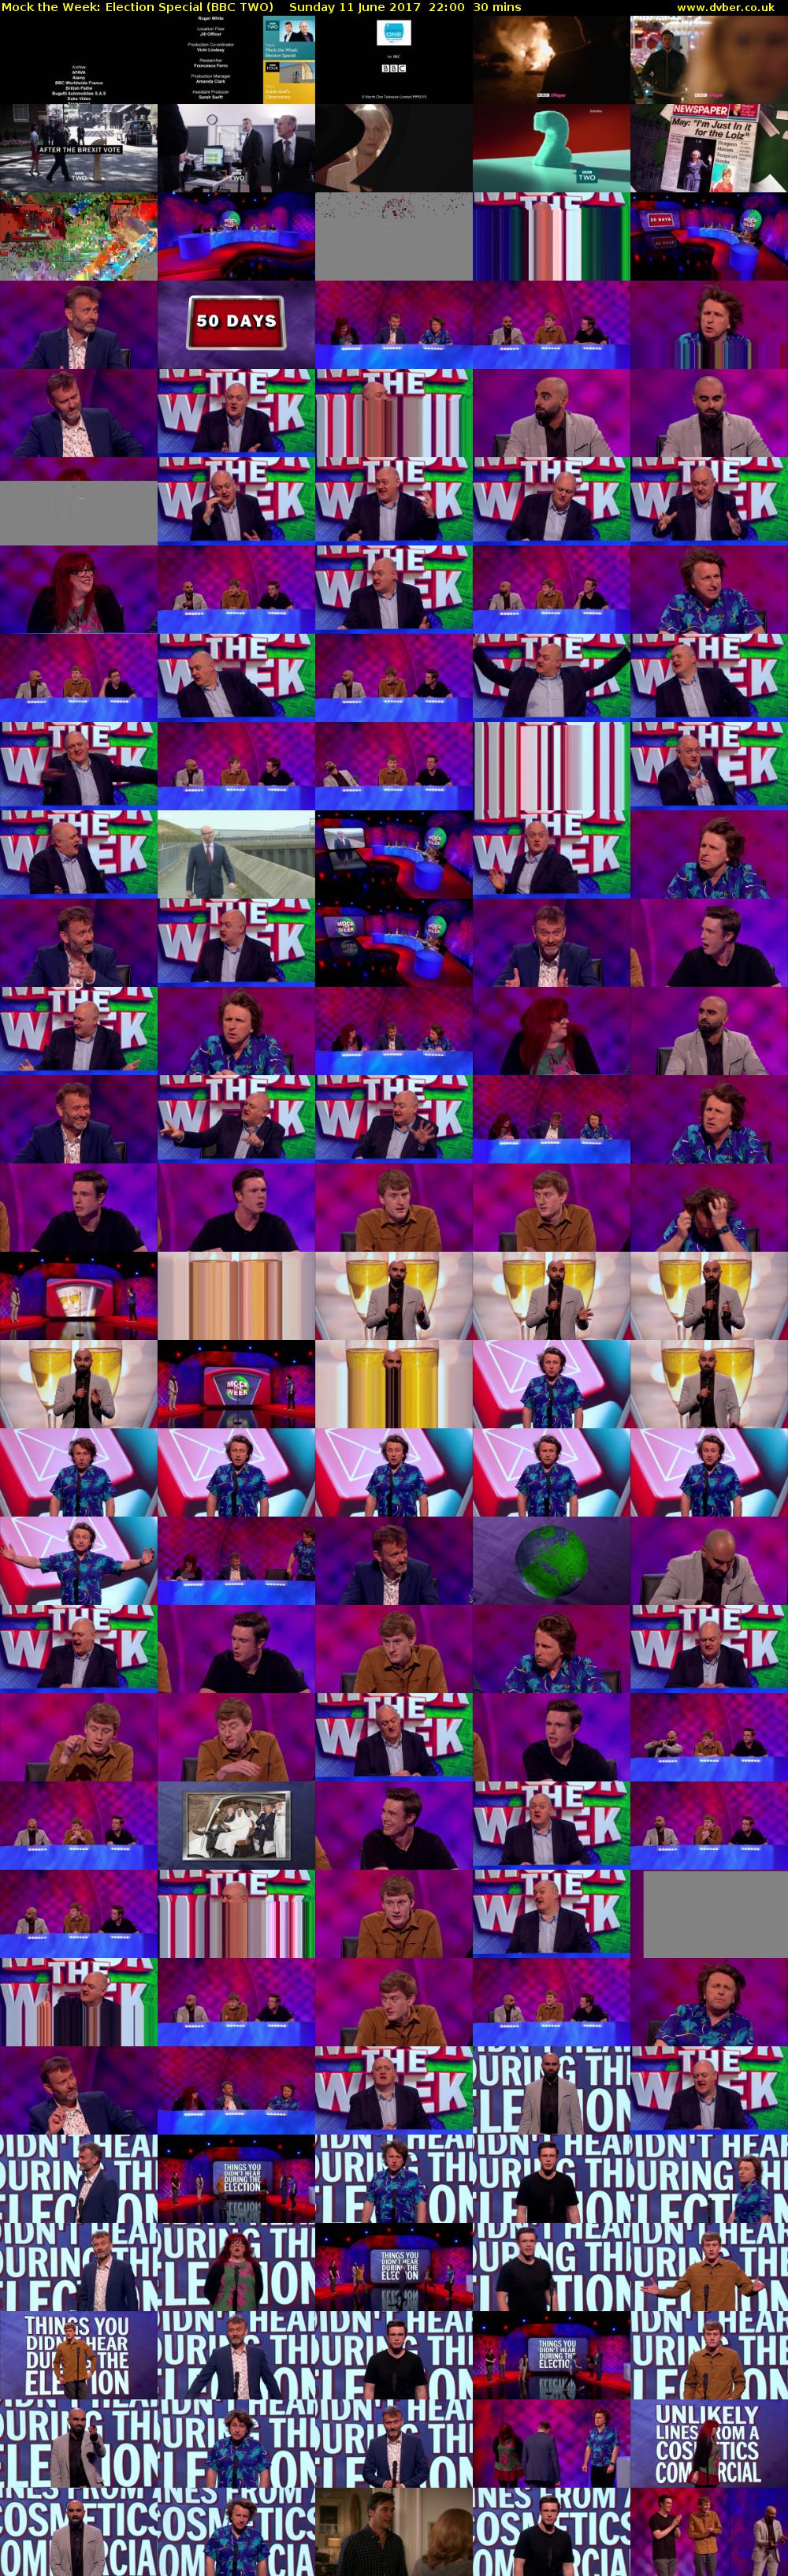 Mock the Week: Election Special (BBC TWO) Sunday 11 June 2017 22:00 - 22:30